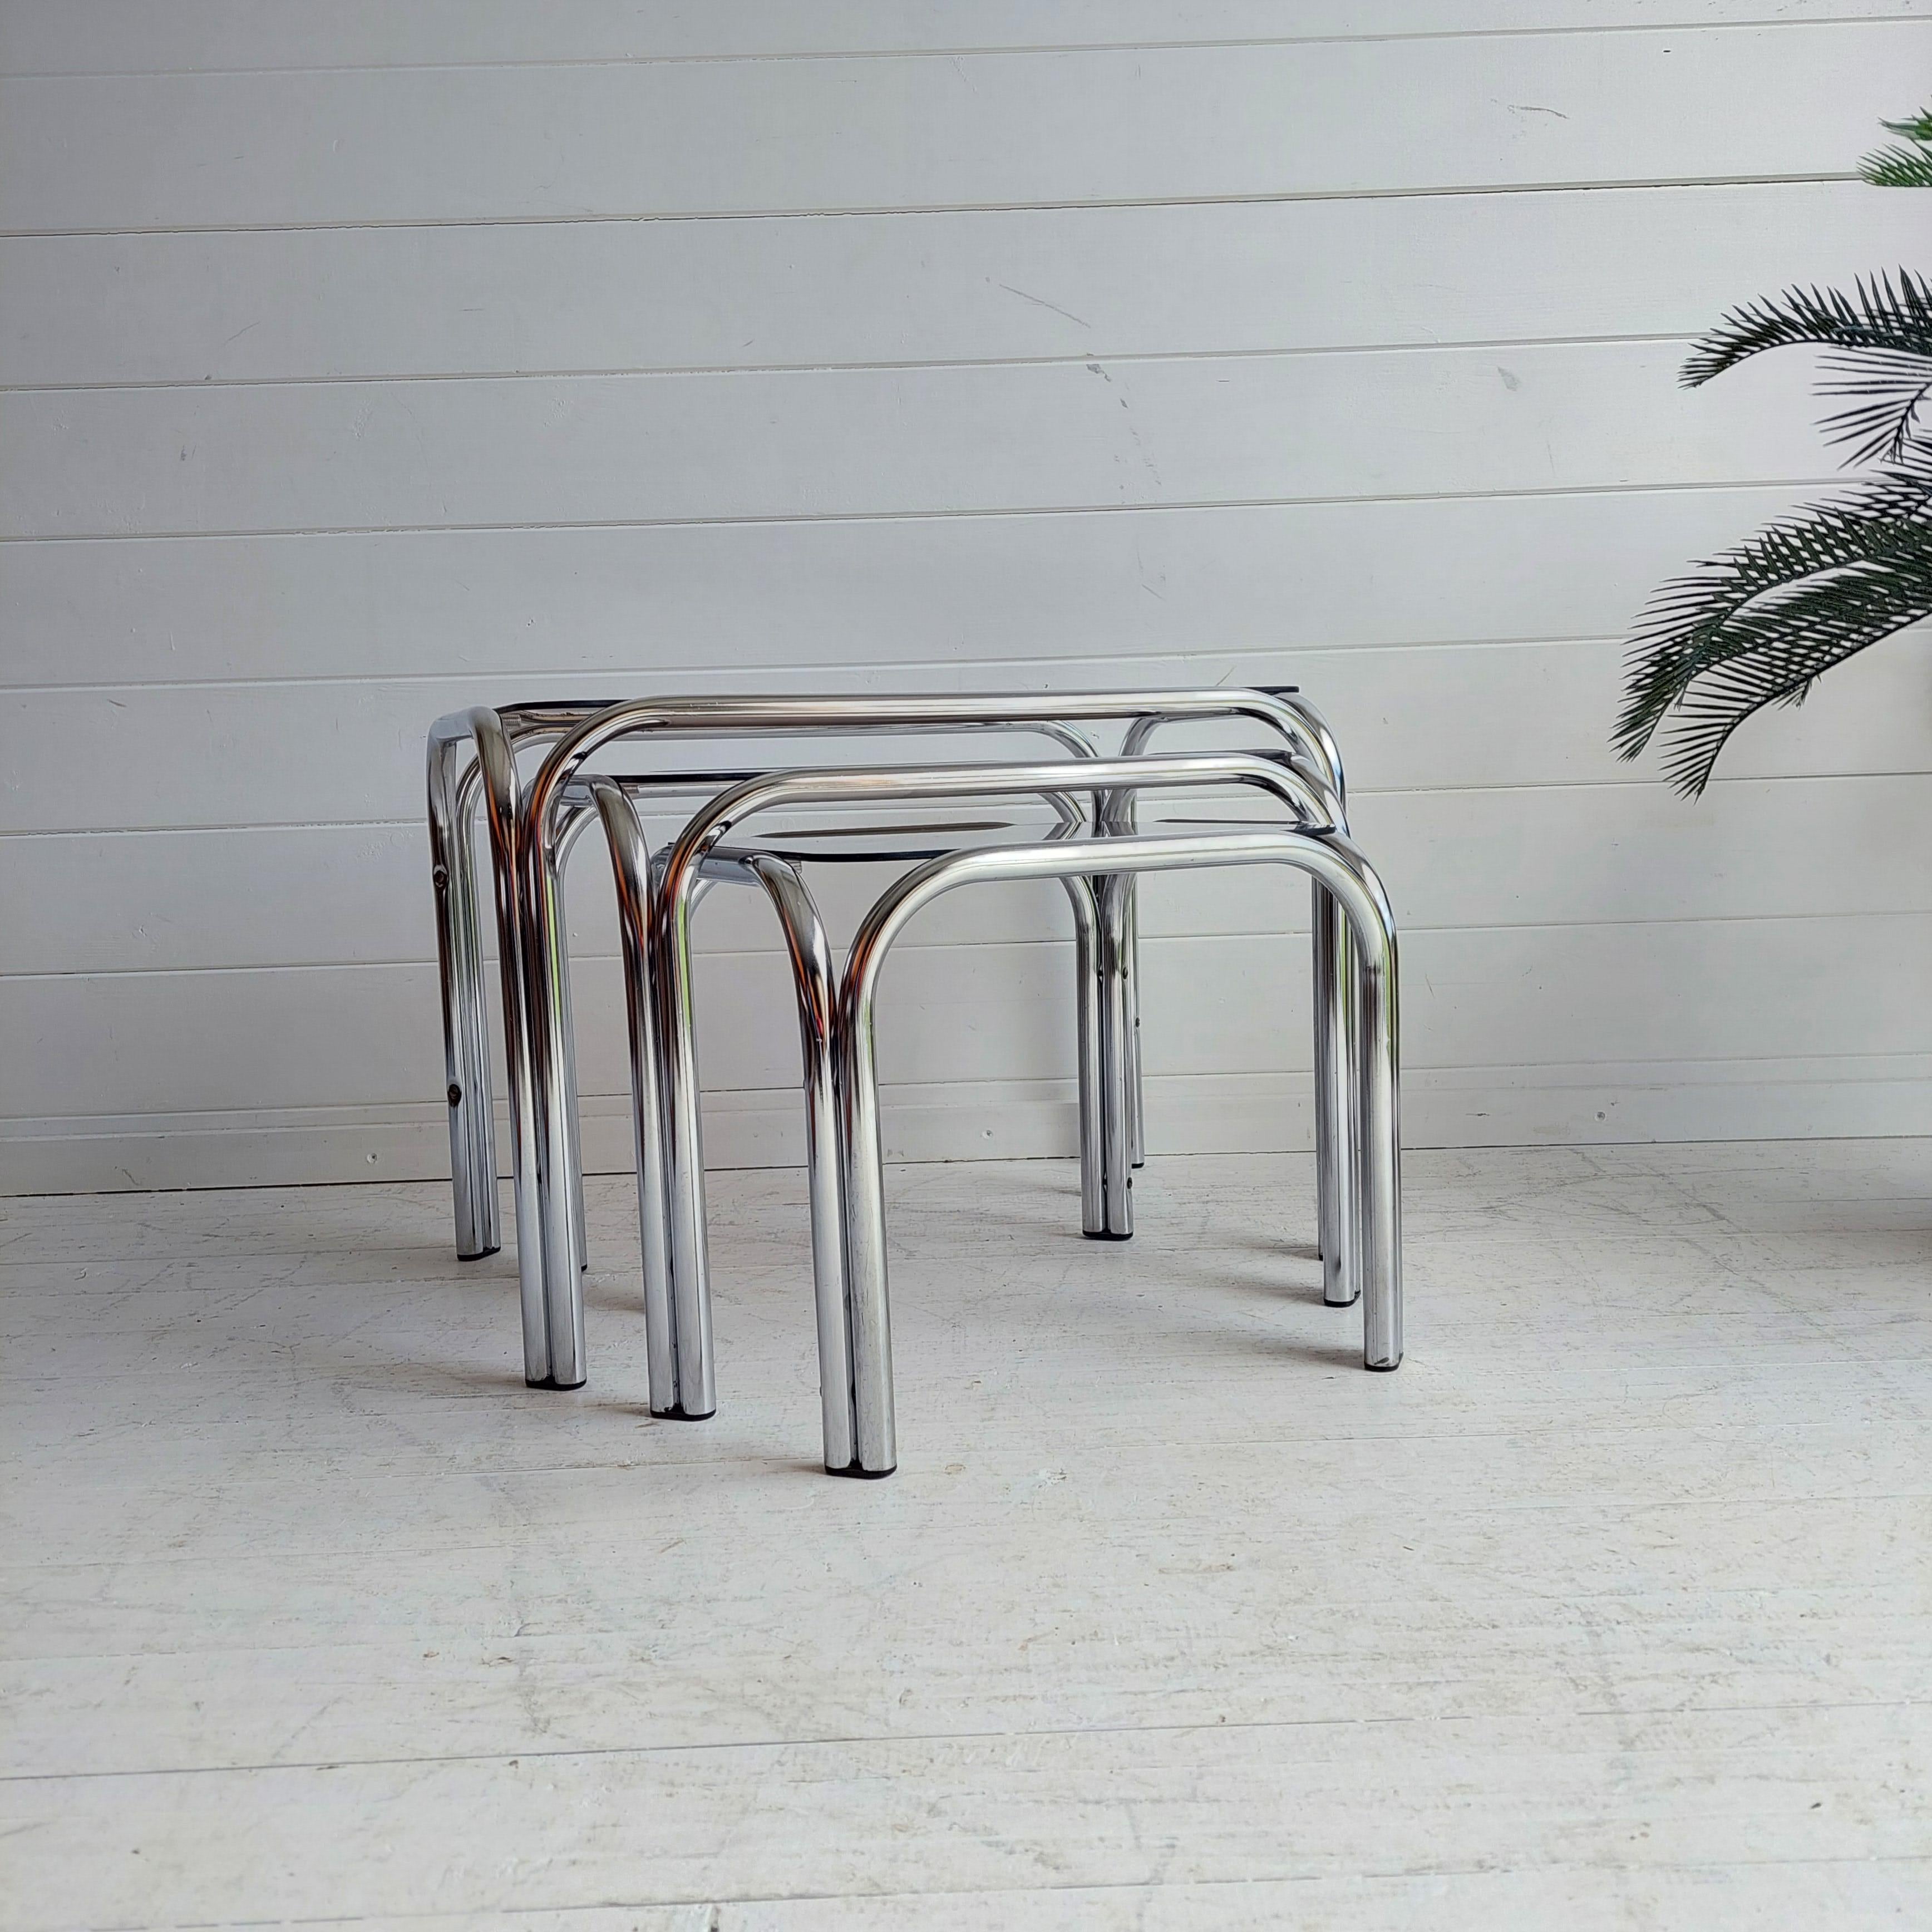 Nesting tables with glass on the tables tops
Chrome metal tubes, 1970s
Space Age chrome smoked glass side table set. 
A beautiful and modern of 3 vintage nesting tables in chrome color. 
All tables have a nice orginal smoked glass top with round